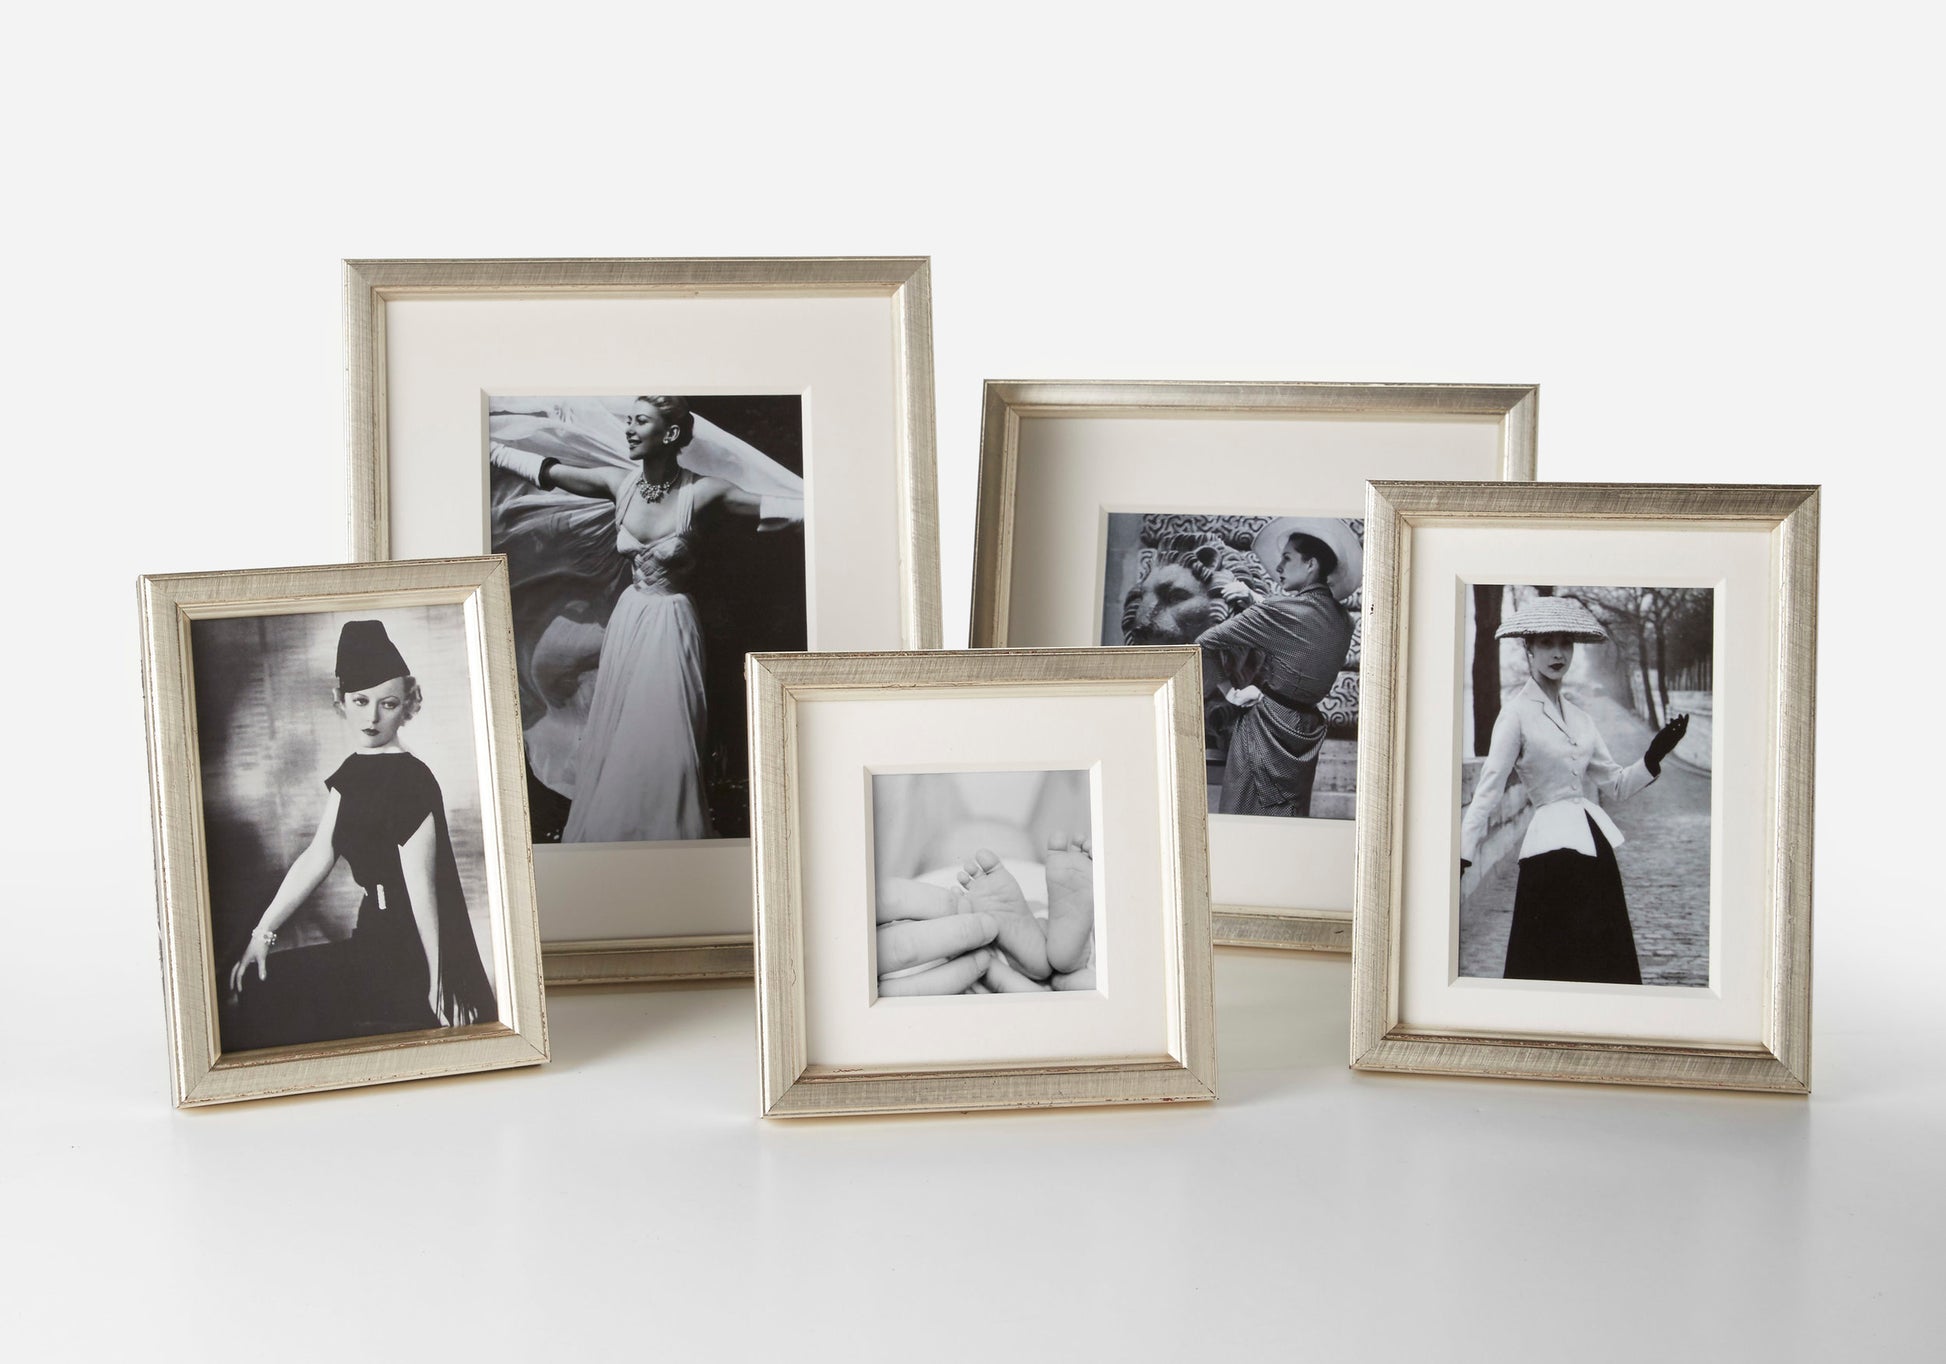 Range of Brancusi Platino Silver tone frames in a grouping on a plain background